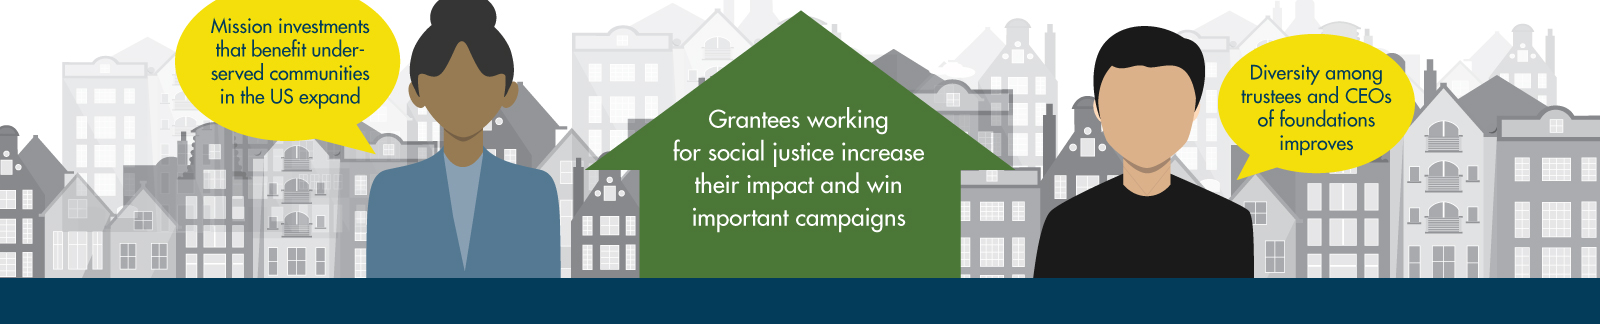 Finally, we want to see an increase in the mission investments that benefit underserved communities, and in diversity among trustees and CEOs of foundations.In the end, we want to grantees working for social justice to increase their impact and win important campaigns.